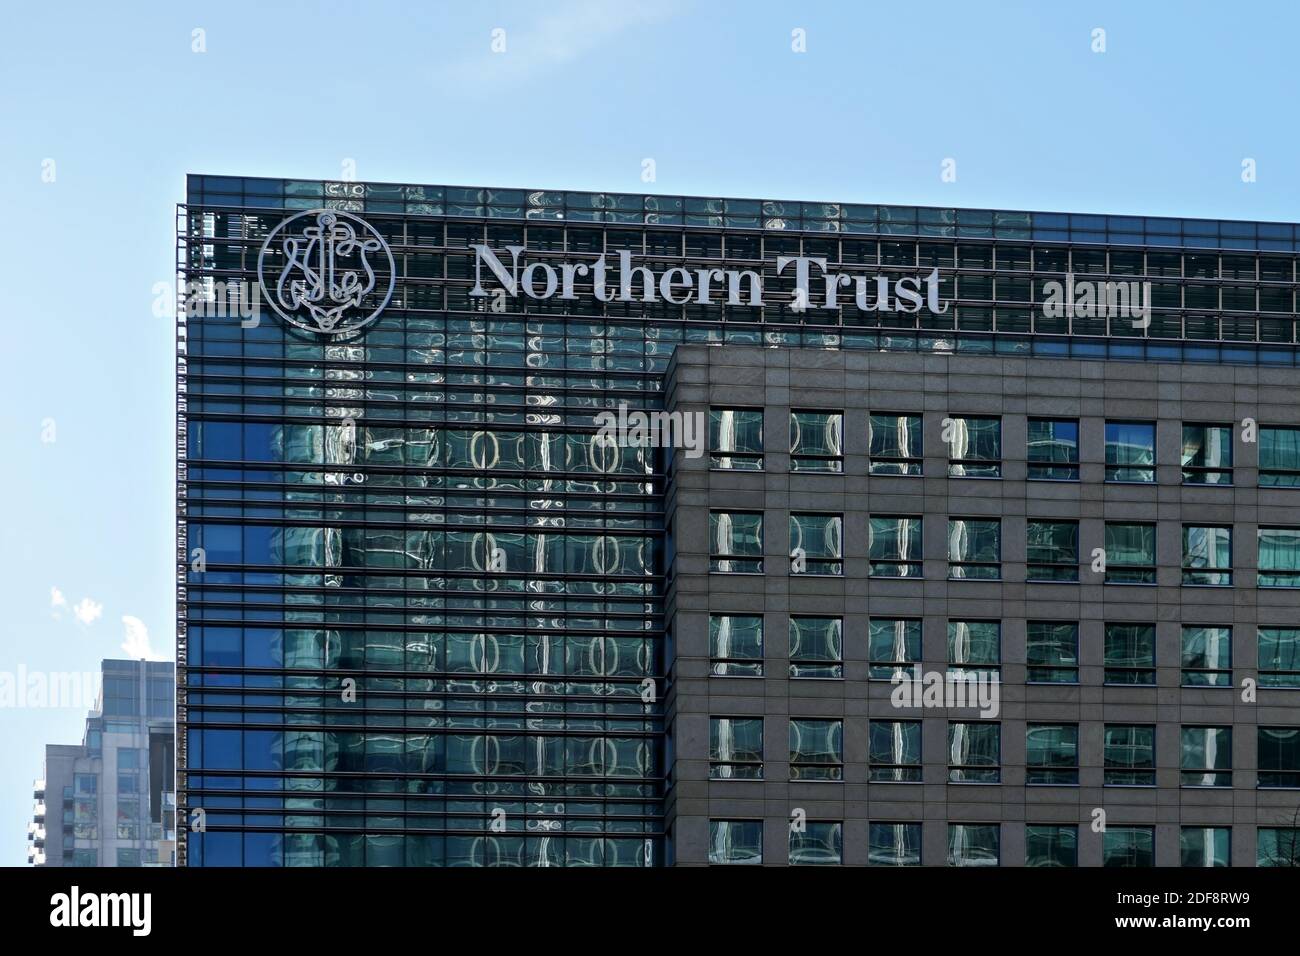 London, United Kingdom - February 03, 2019: Northern Trust UK branch offices at Canary Wharf. NT corporation is financial services company founded in Stock Photo